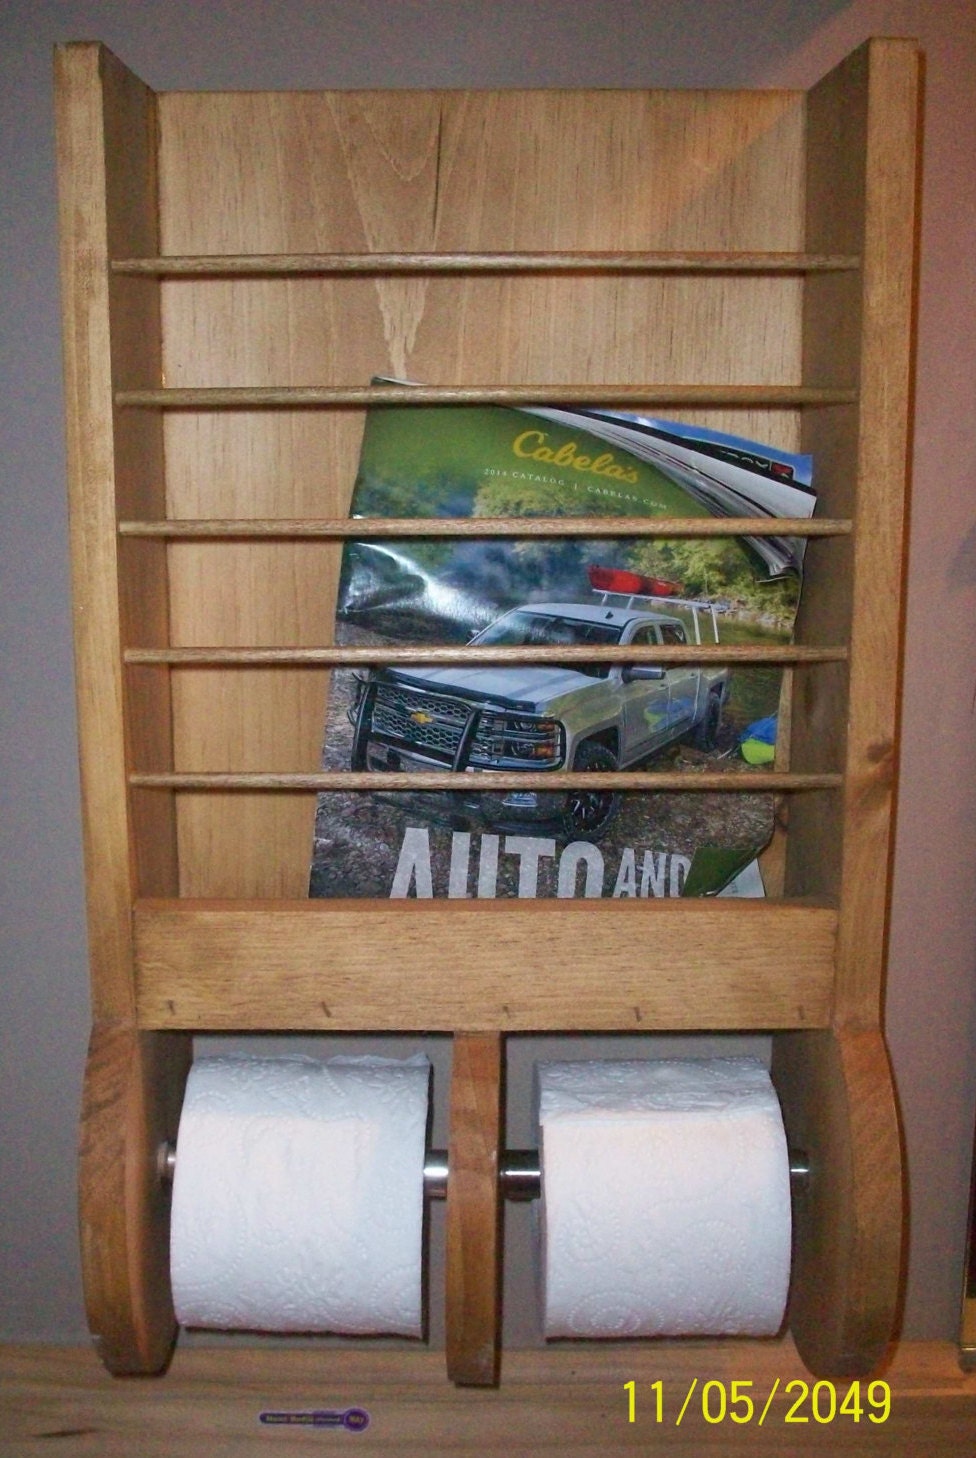 Brentwood-18 recessed in wall solid wood double toilet paper holder - holds  any size rolls - 7 x 14.5